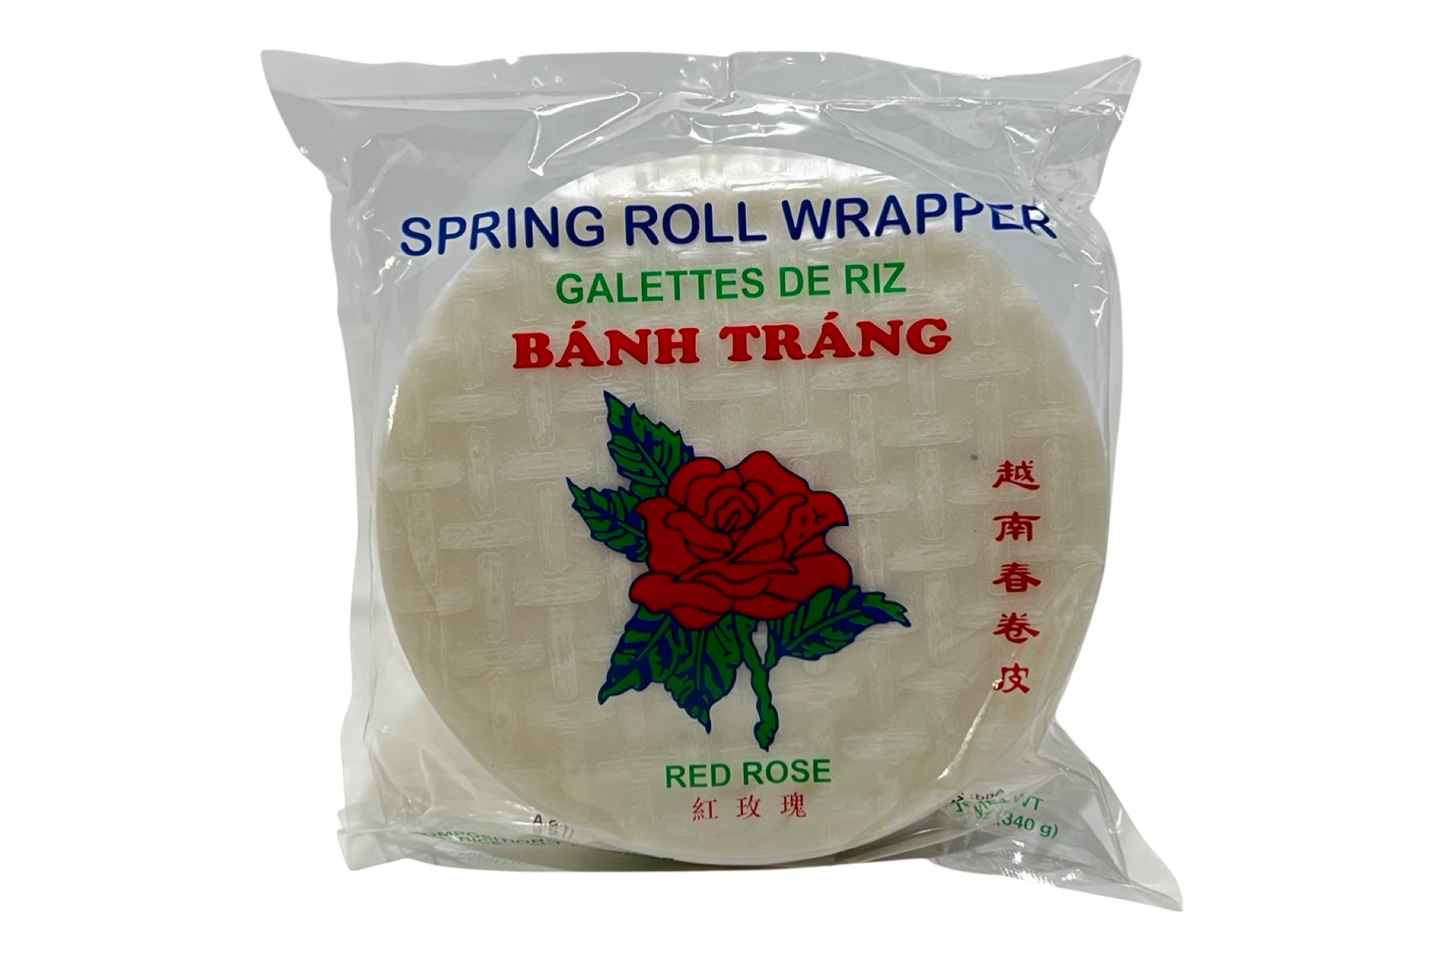 Spring Roll Wrapper Banh Trang Red Rose size: 16cm 340g